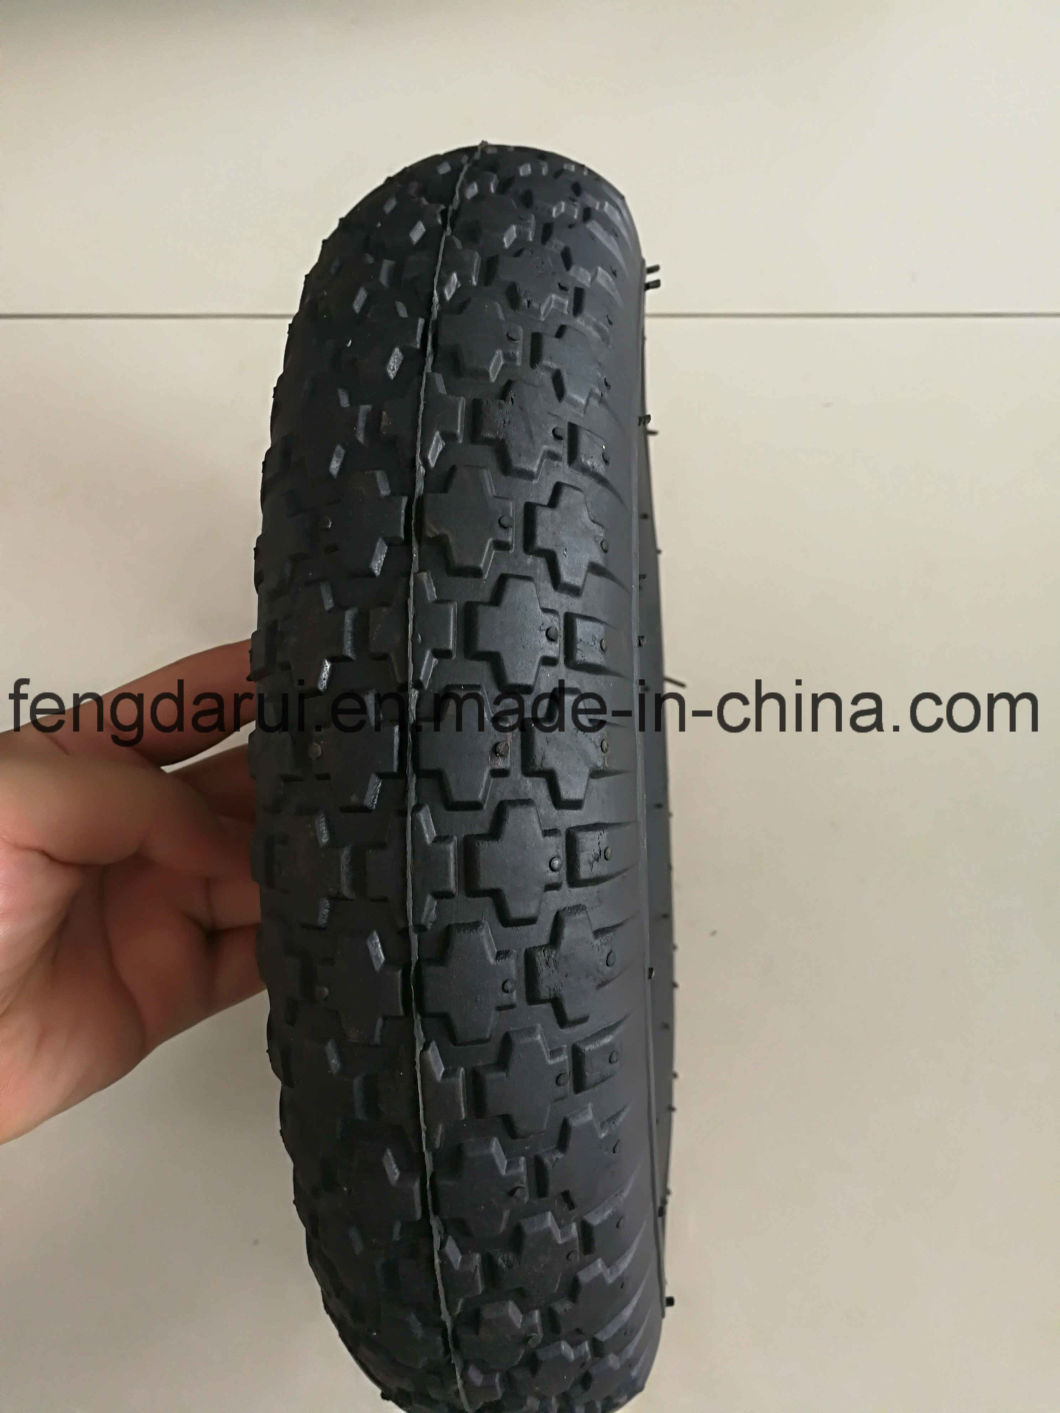 14 Inch Rubber Tyre Used for Wheelbarrow